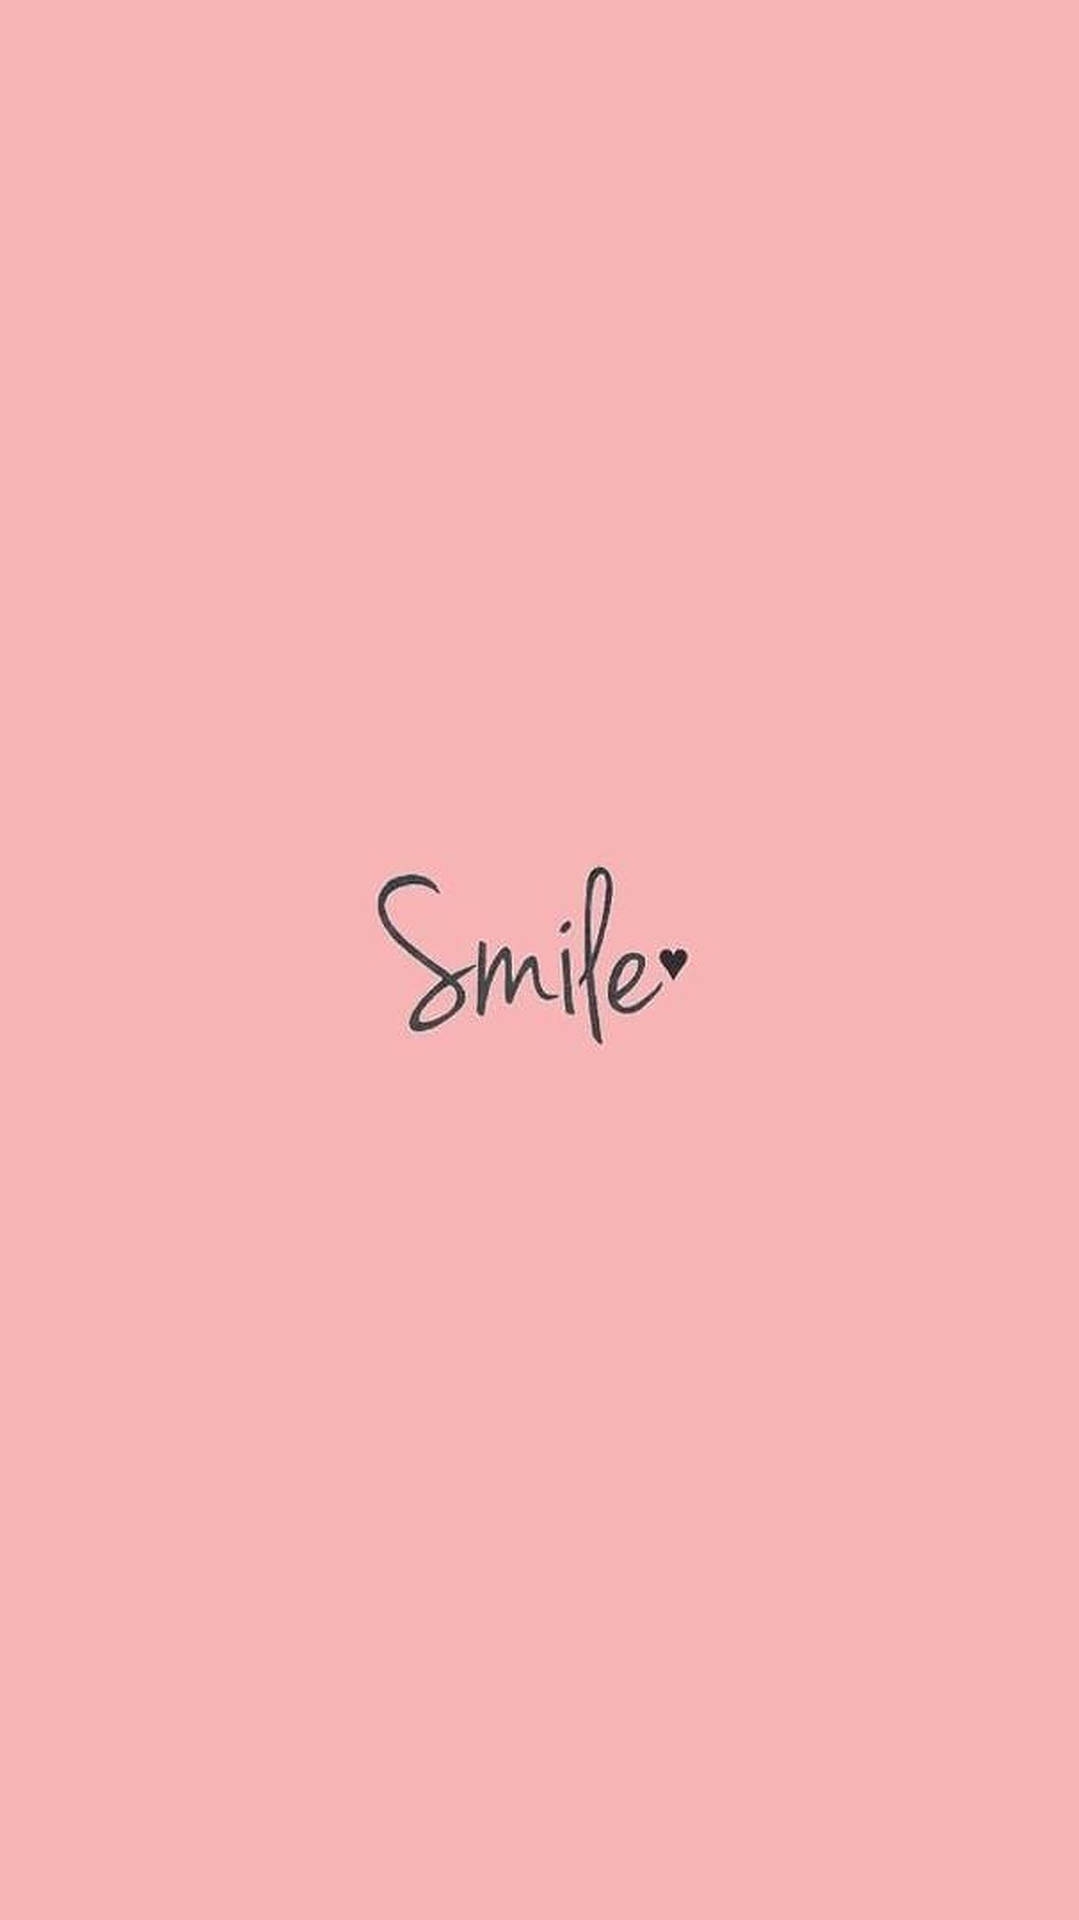 Smile Aesthetic Word Picture